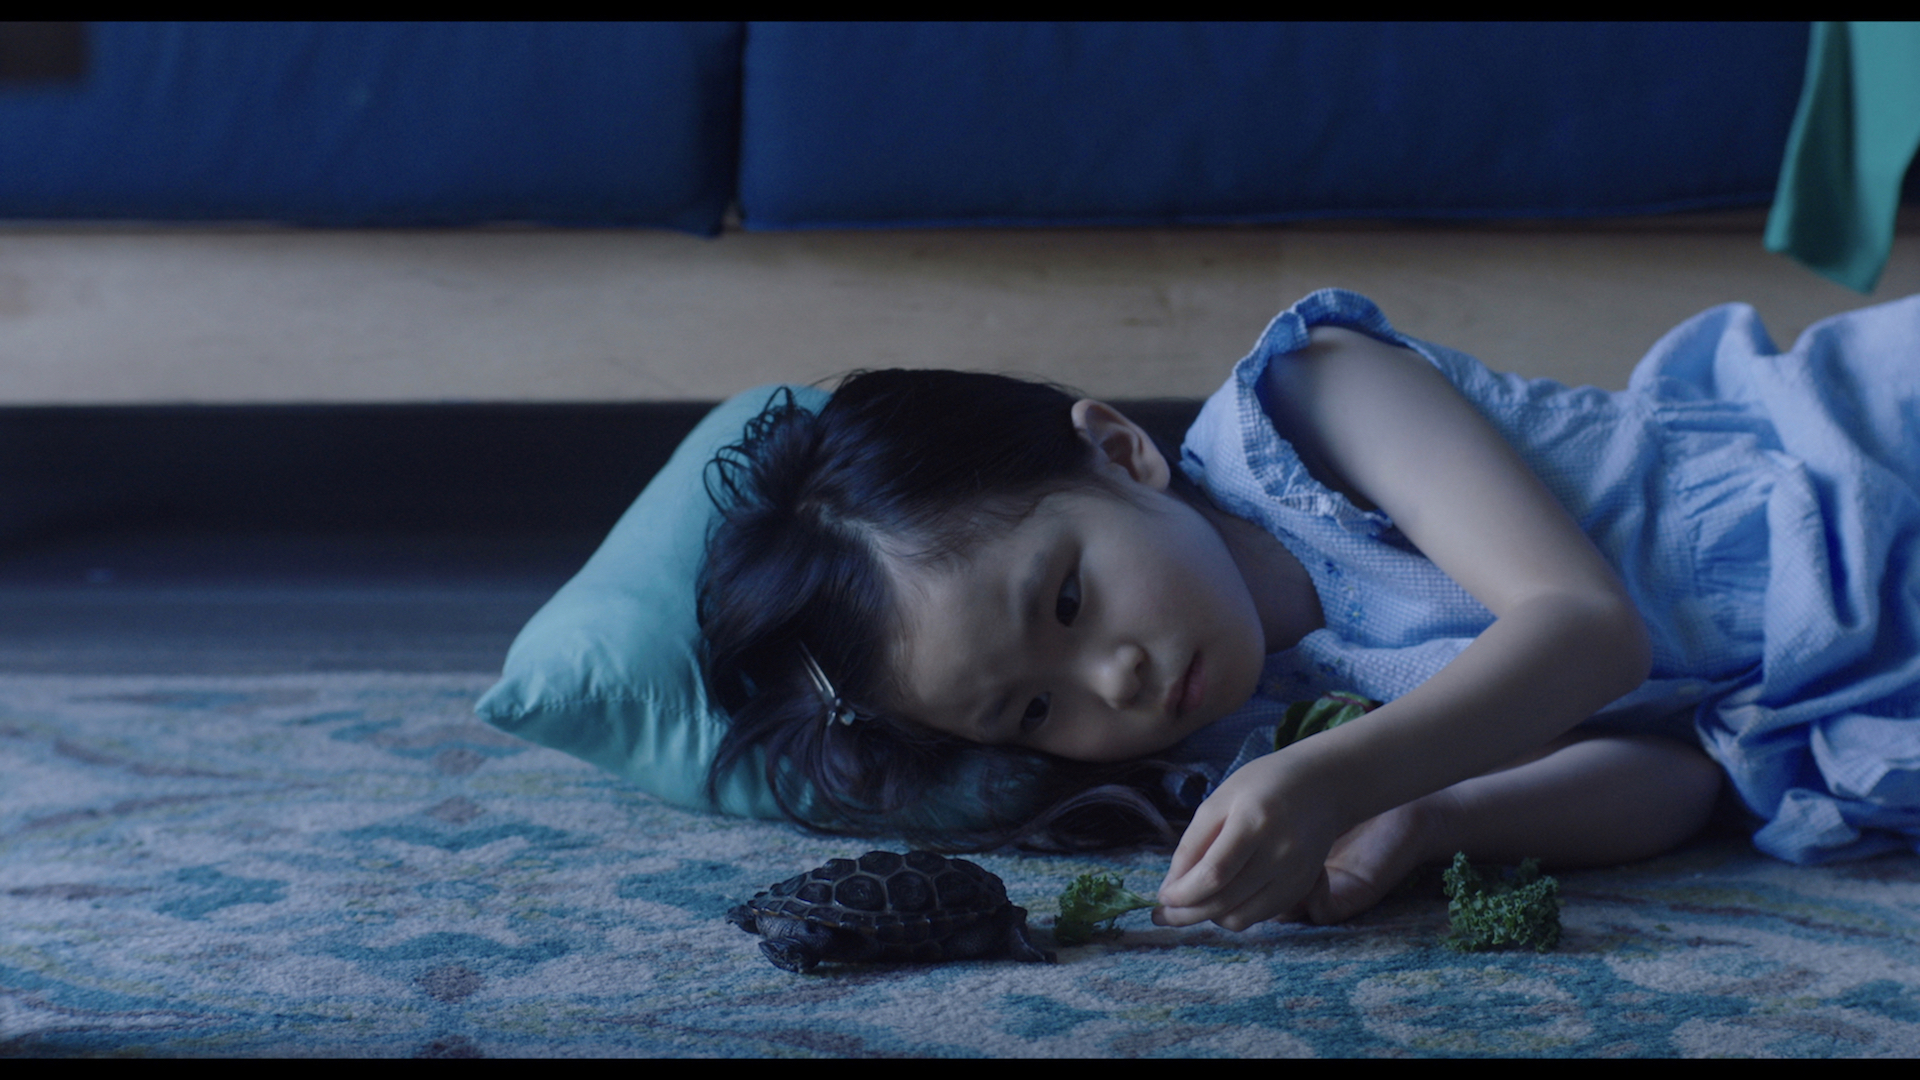 still taken from a film. A little girl lying on the floor in a dimly lit room, feeding a small tortoise some broccoli.